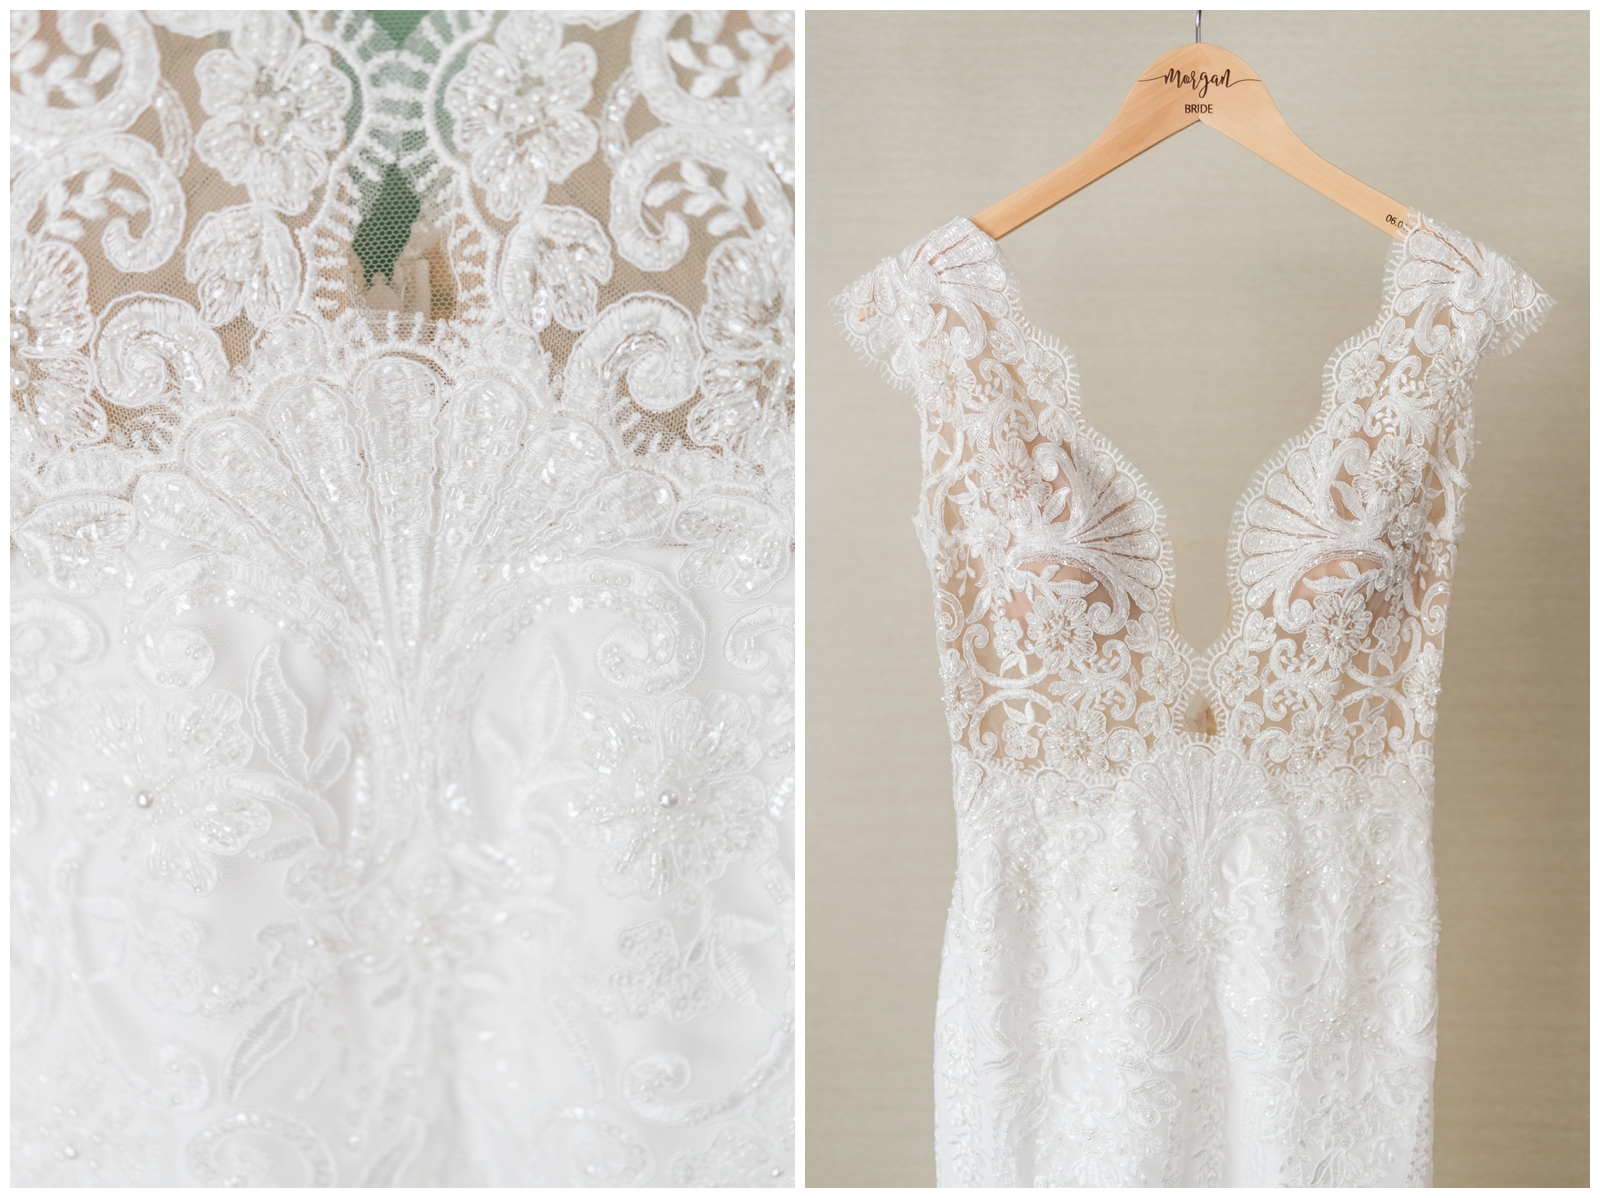 lace details on wedding gown for Ohio wedding day at EagleSticks Golf Club